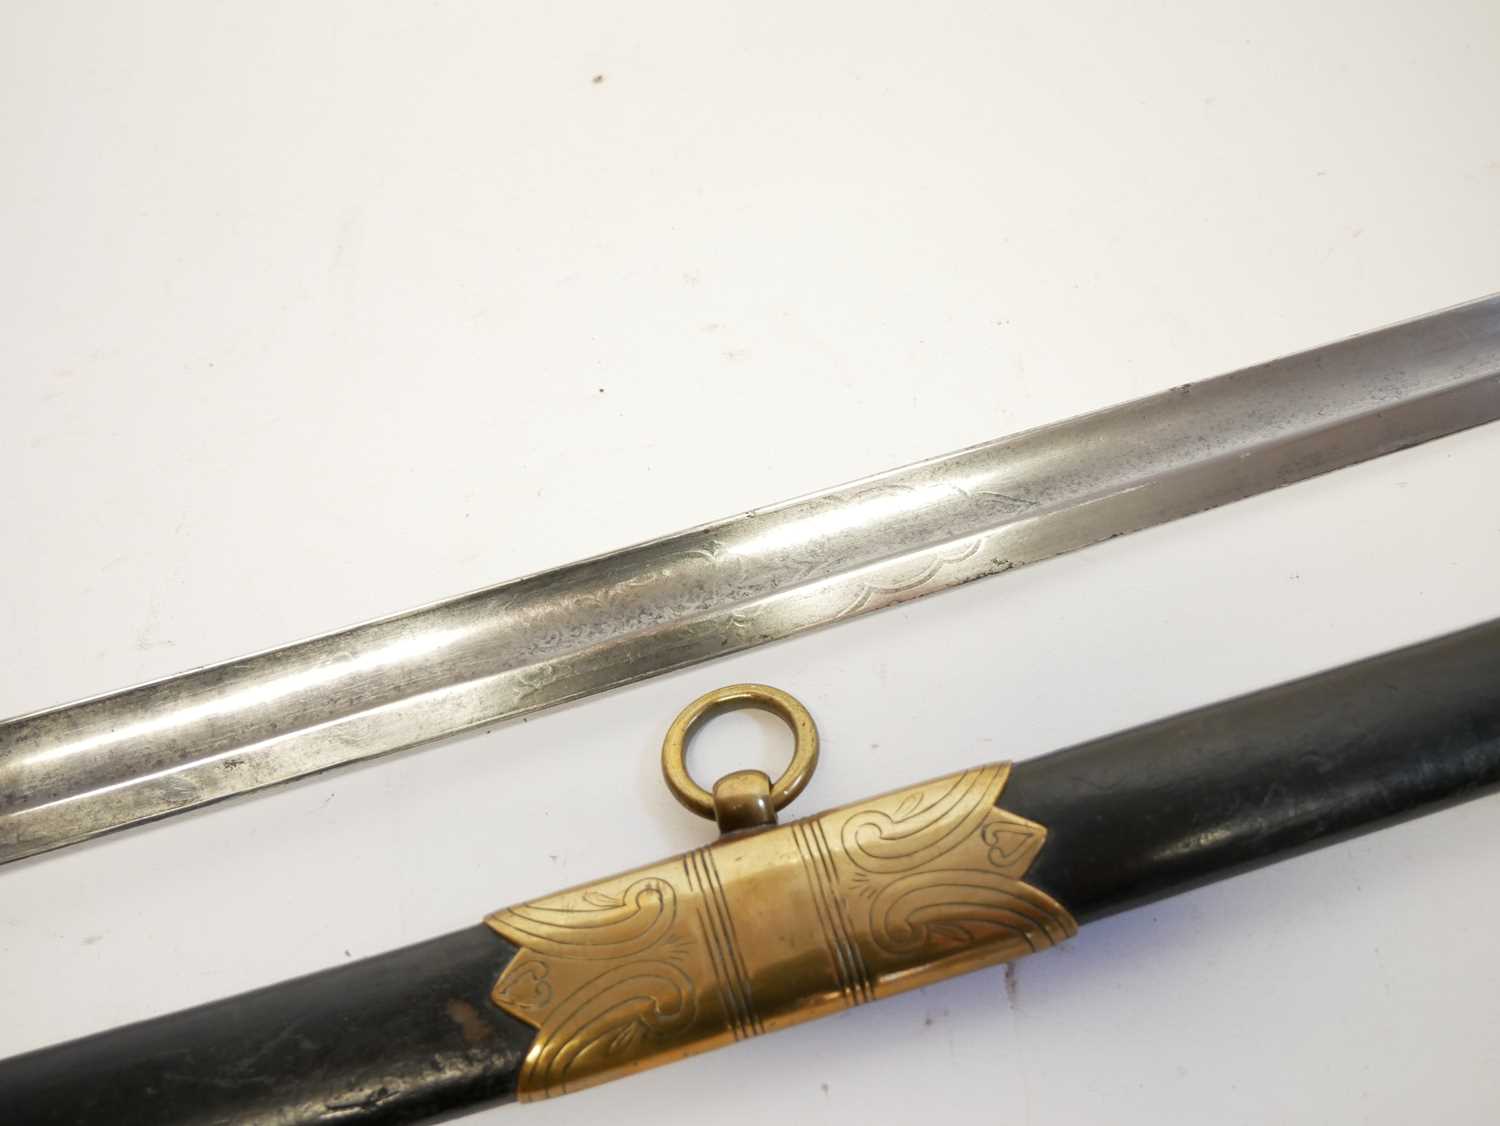 Royal Navy Petty Officer's sword, similar to an 1827 Naval sword but without the lion head pommel, - Image 8 of 16